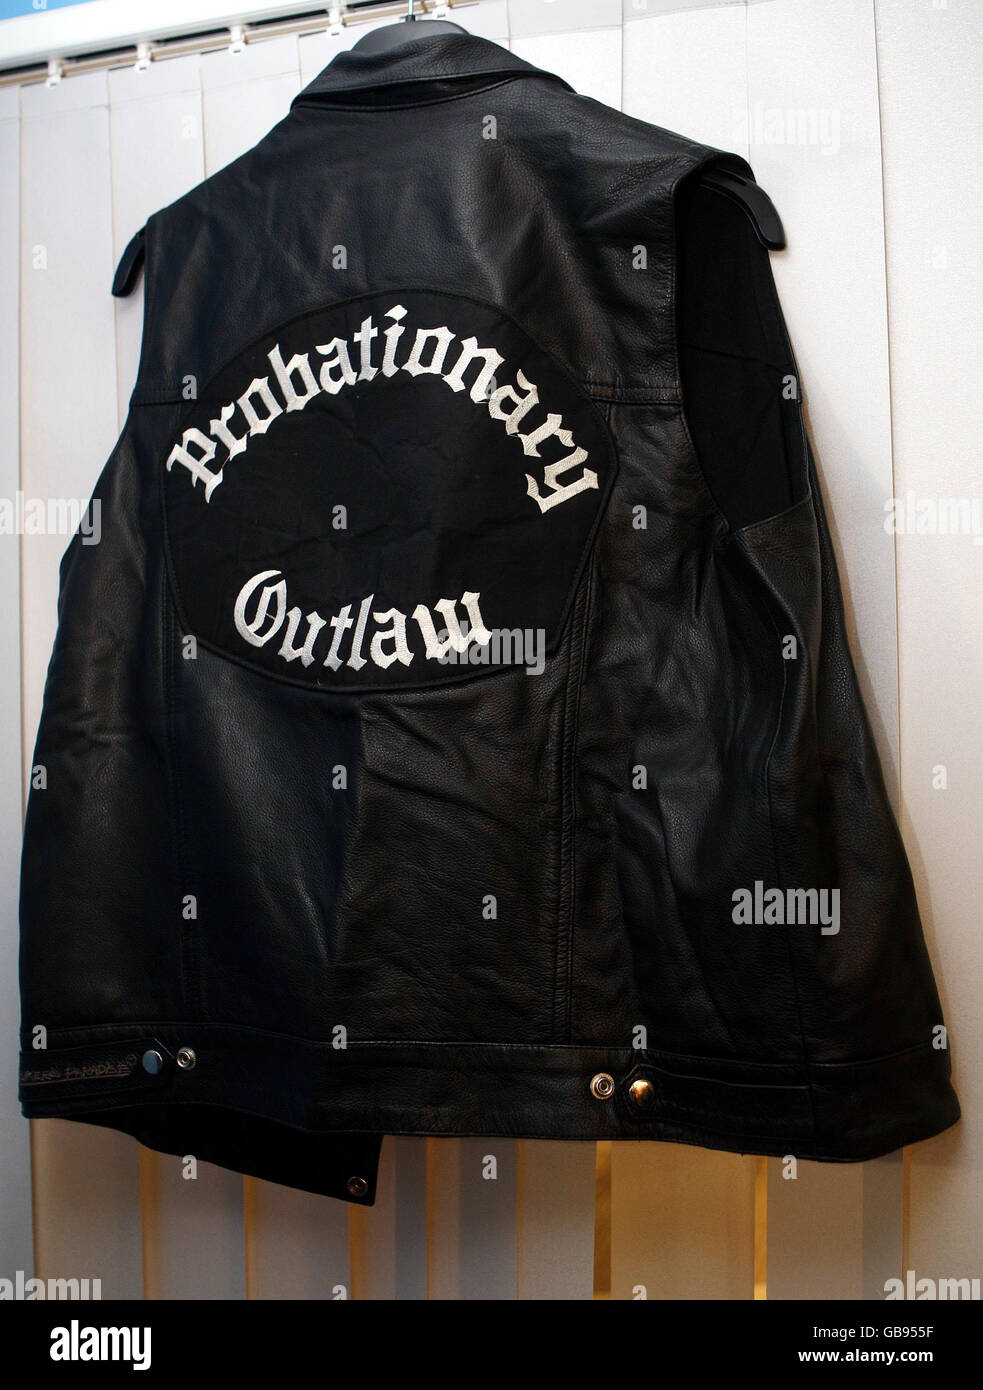 Previously unreleased photo of a leather jacket as worn by probationary members of the 'Outlaw' bikers shown by Warwickshire Police, which was among evidence collected during the prosecution of those accused of the murder of biker Gerry Tobin on the M40 motorway, on November 5. Stock Photo